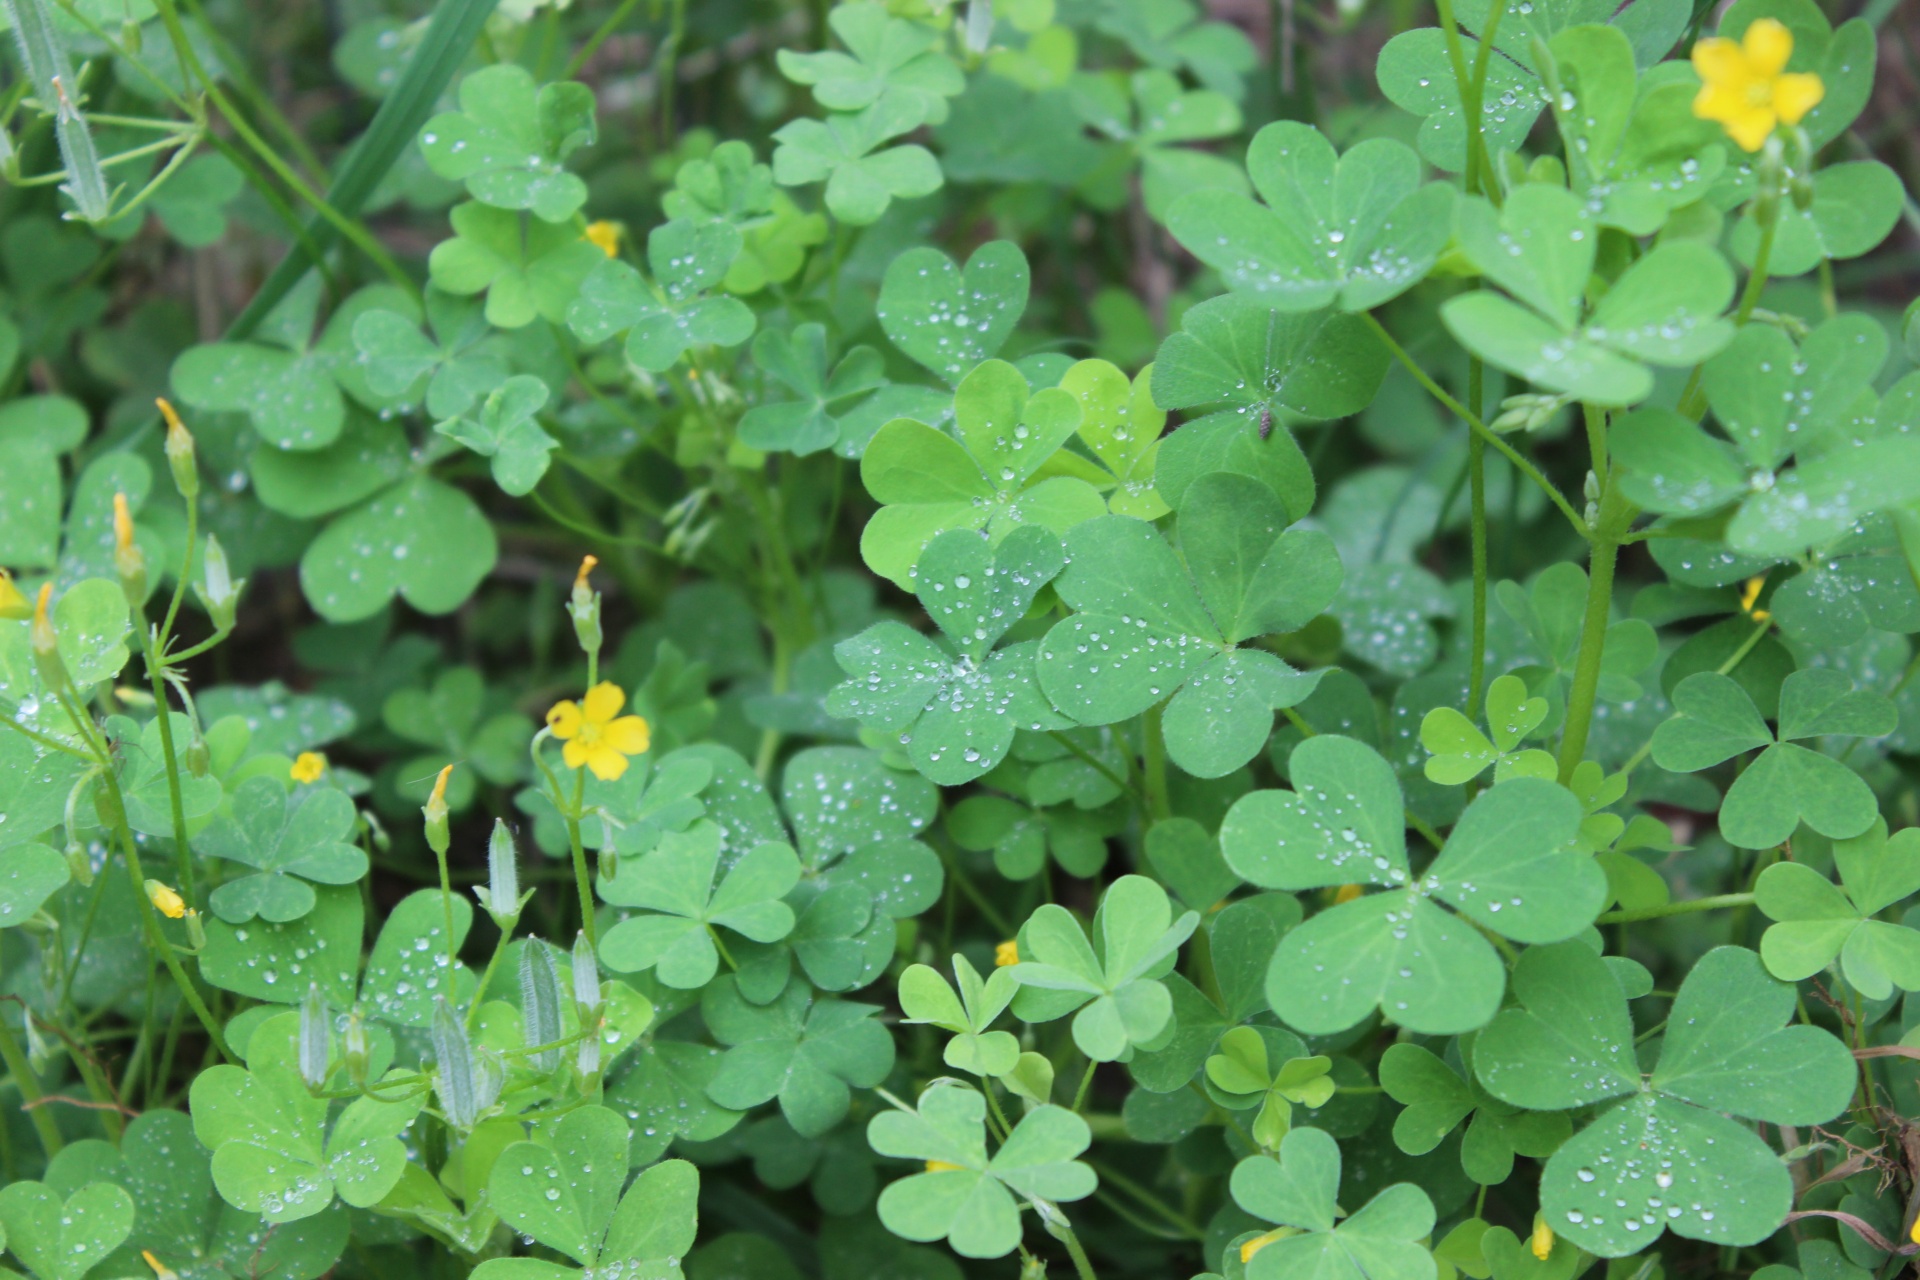 I shot the clover patch after the morning rain and the beautiful drops of water seem to glisten on the serene clovers.